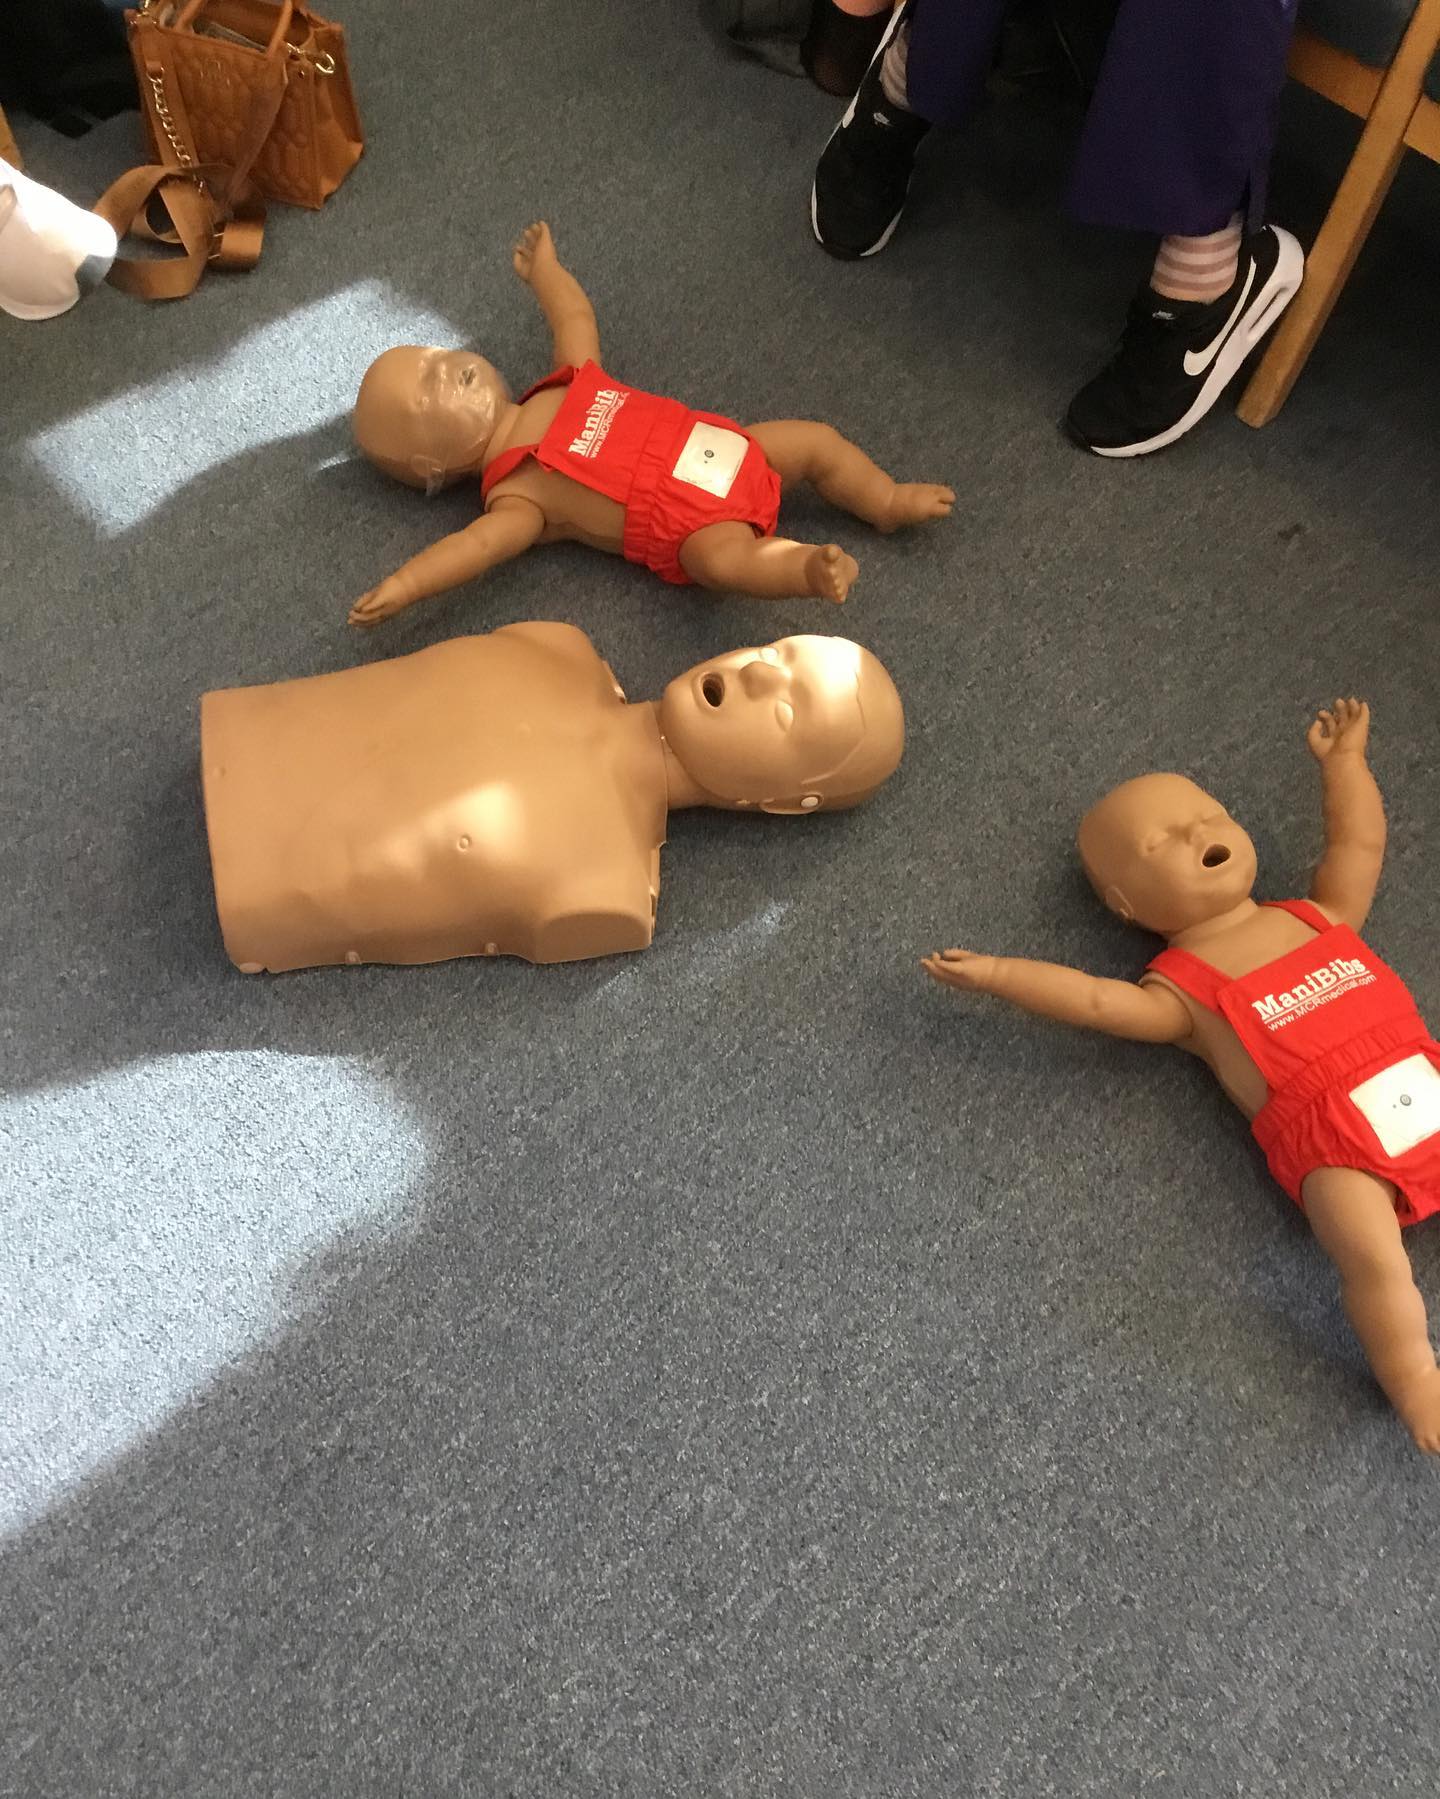 CPR dummies used at our dental assisting school to teach basic life support for healthcare providers.